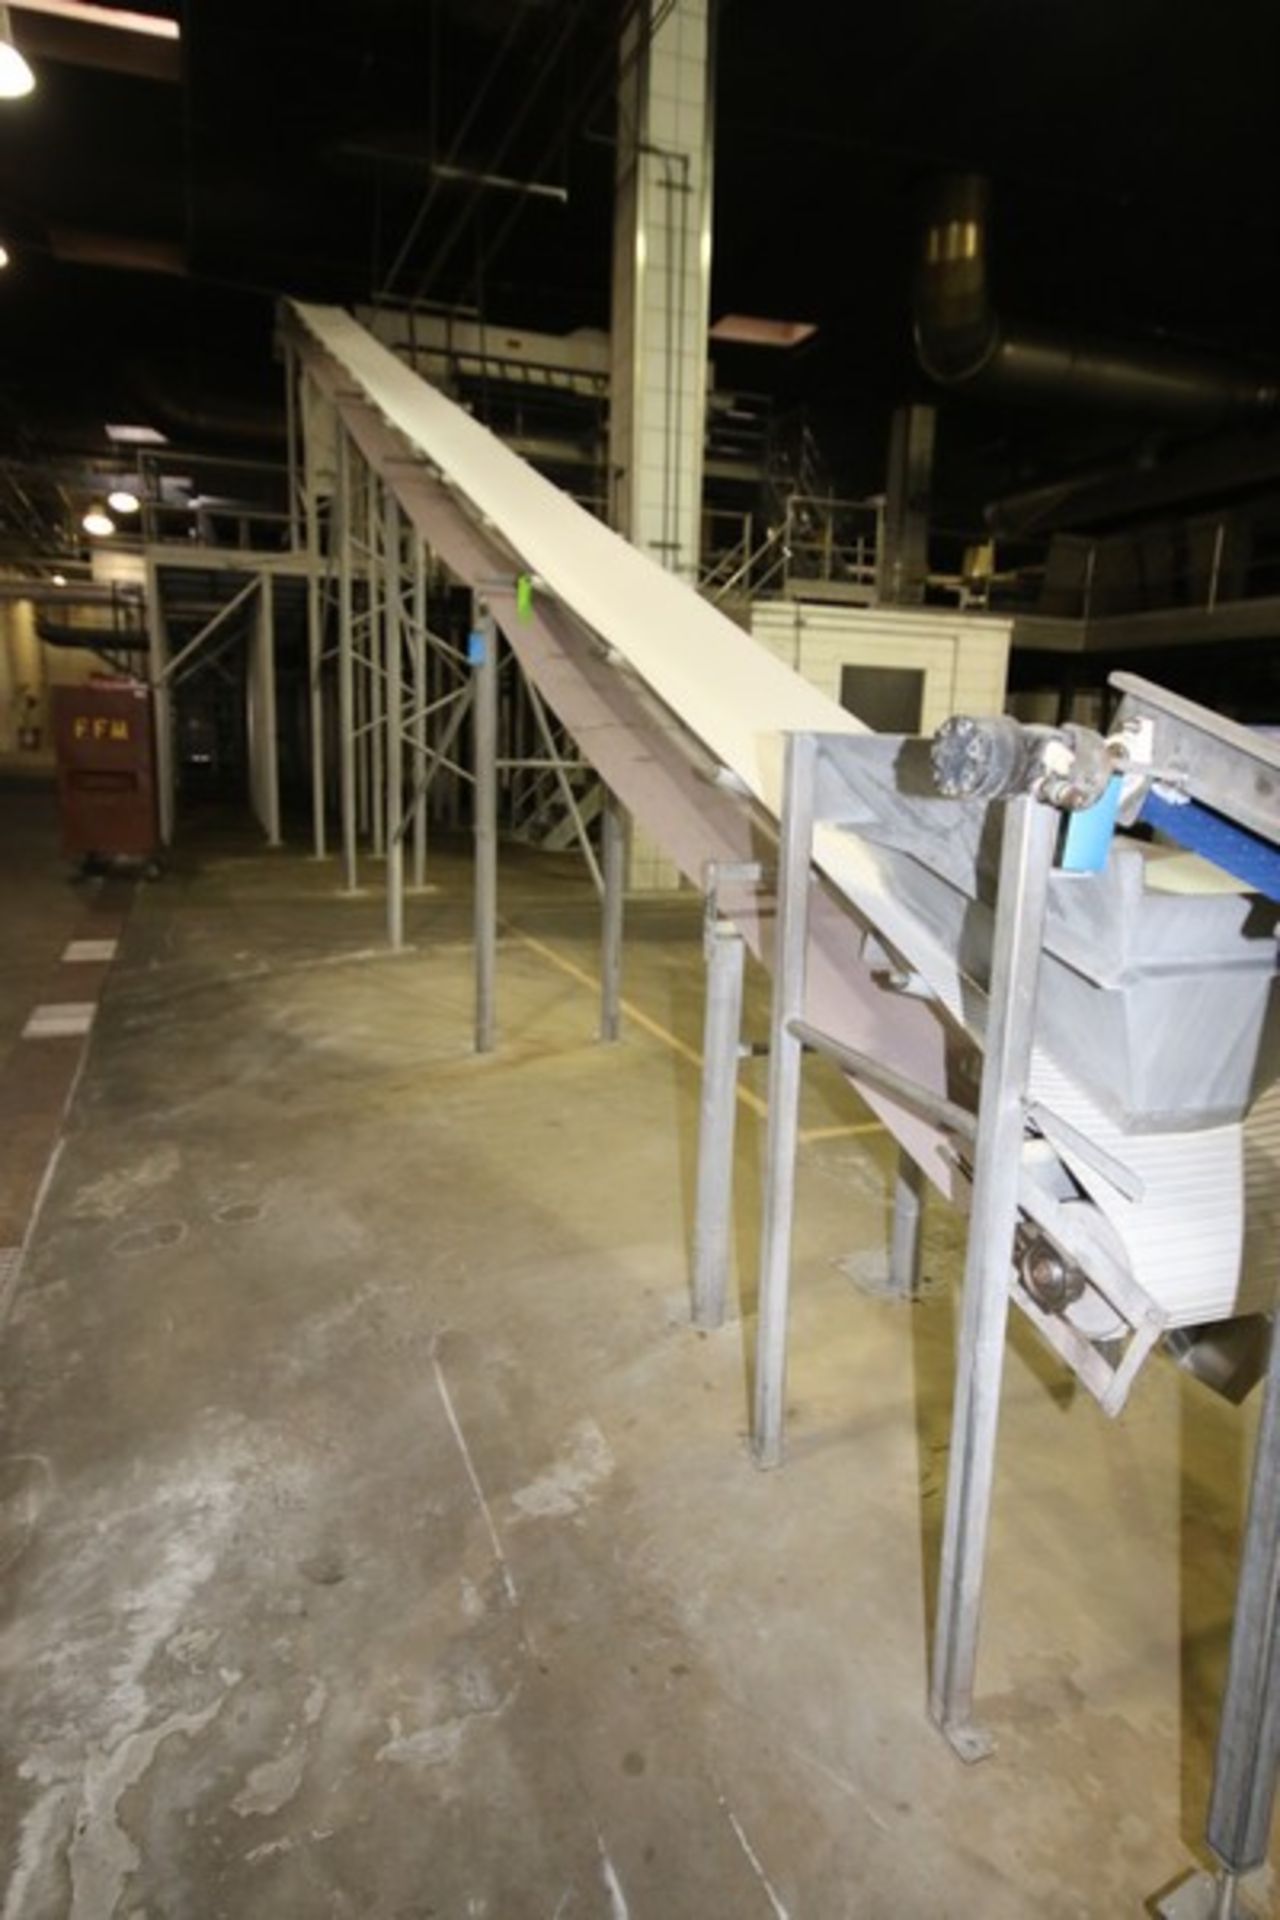 Key V-Shape Incline Feed Conveyor, with Cleated Vinyl Beat, Aprox. 24" W Belt, with Mounted S/S